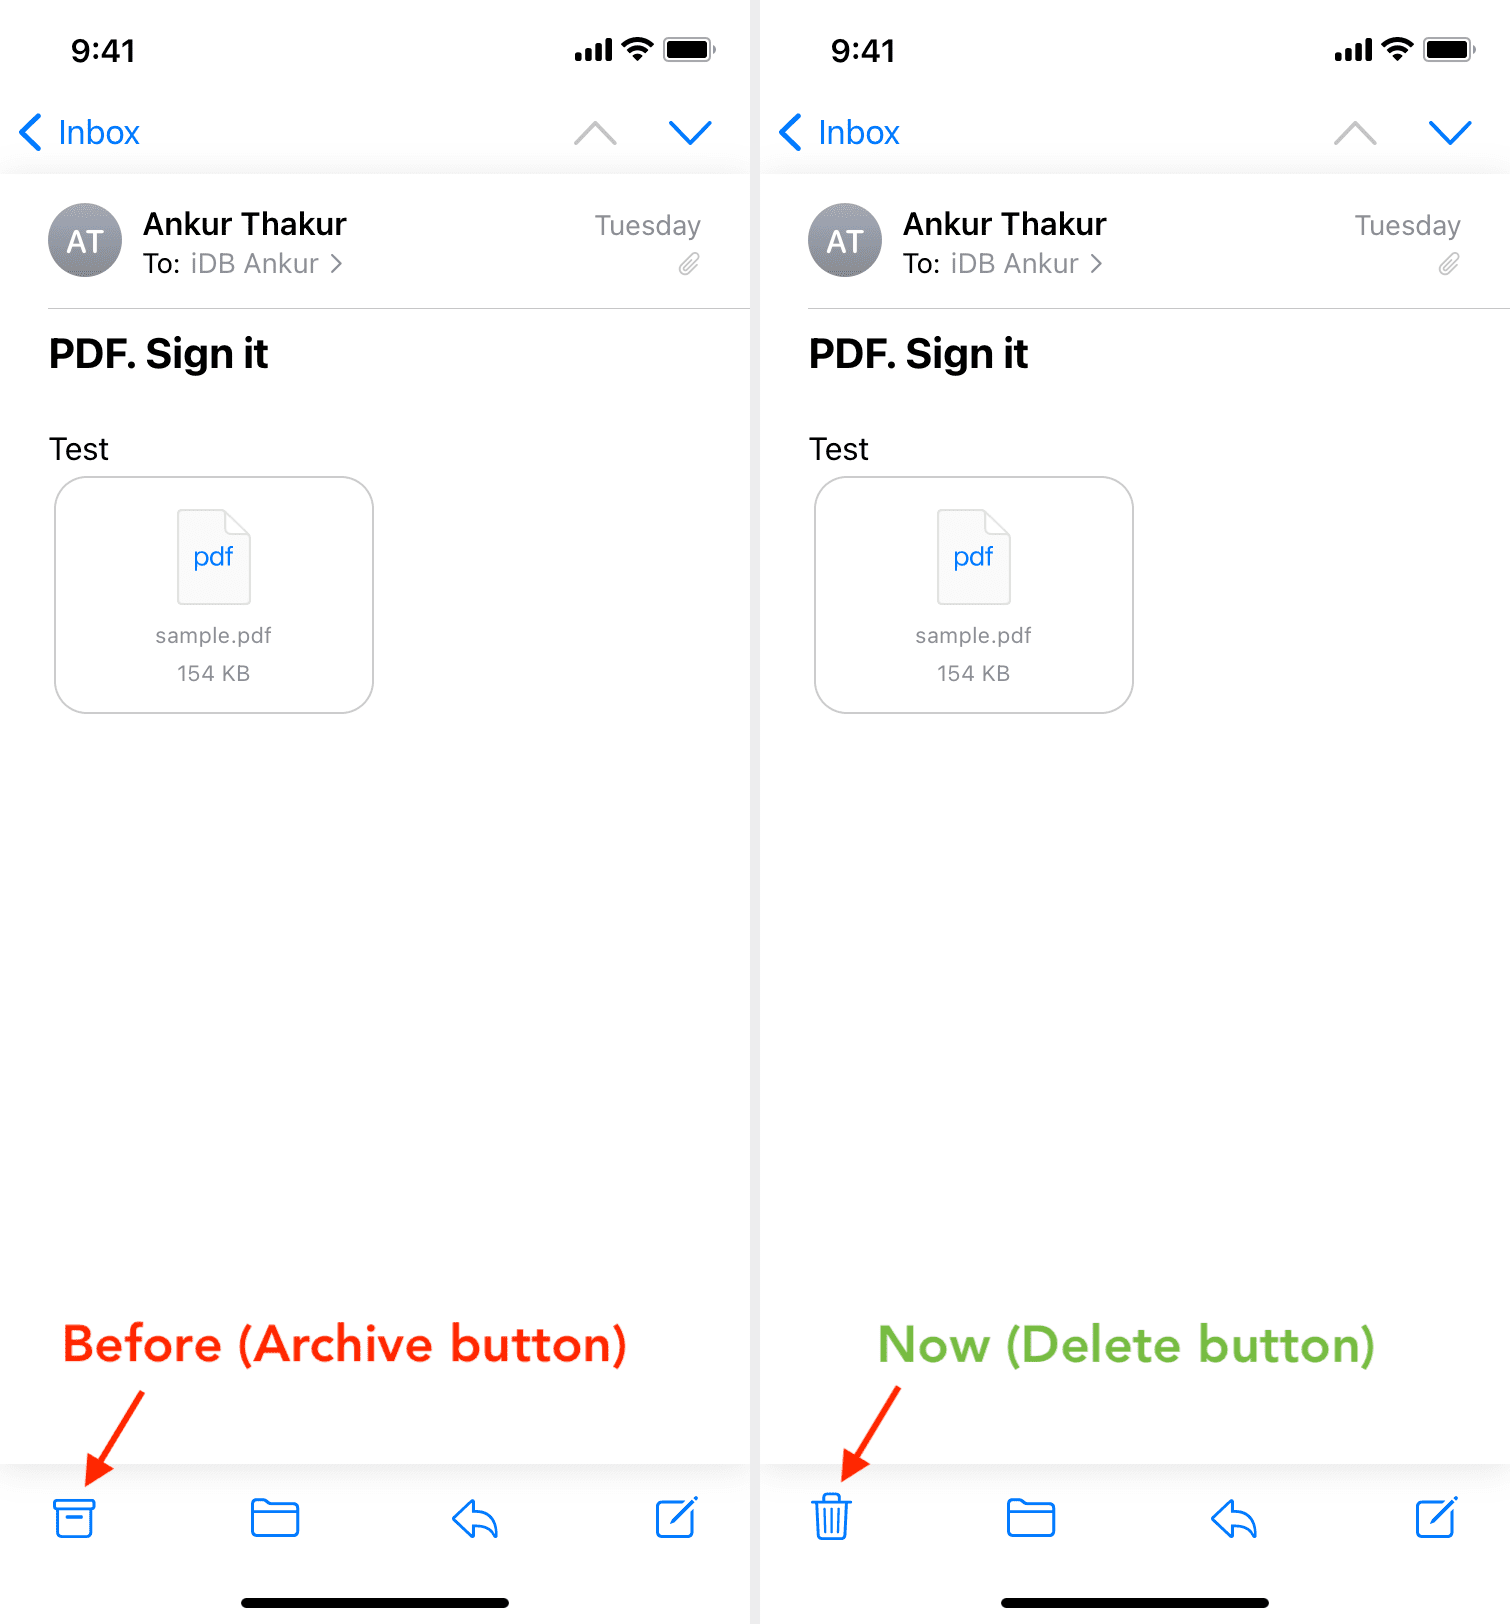 Archive replaced by delete in iOS Mail app